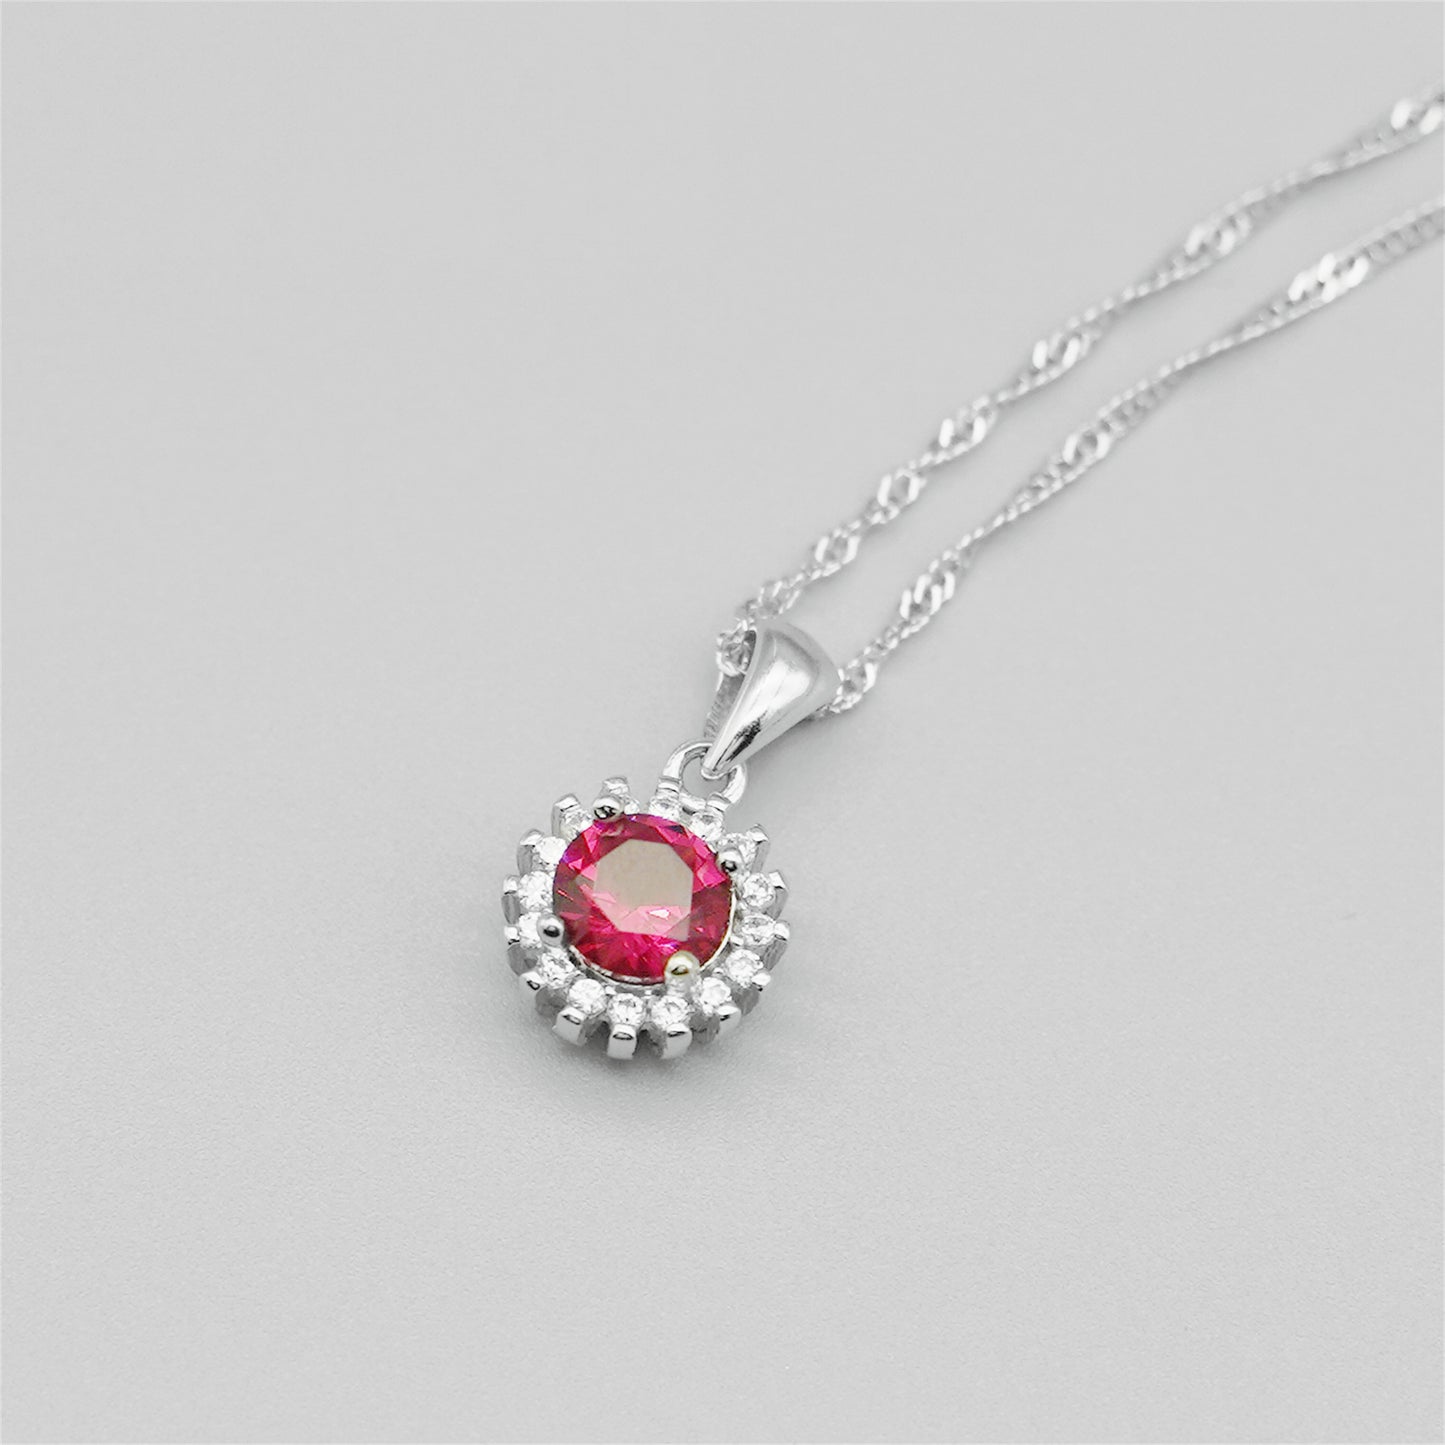 Statement 925 Sterling Silver Red Ruby CZ Cluster Jewelry Set with Choice of Chain - sugarkittenlondon